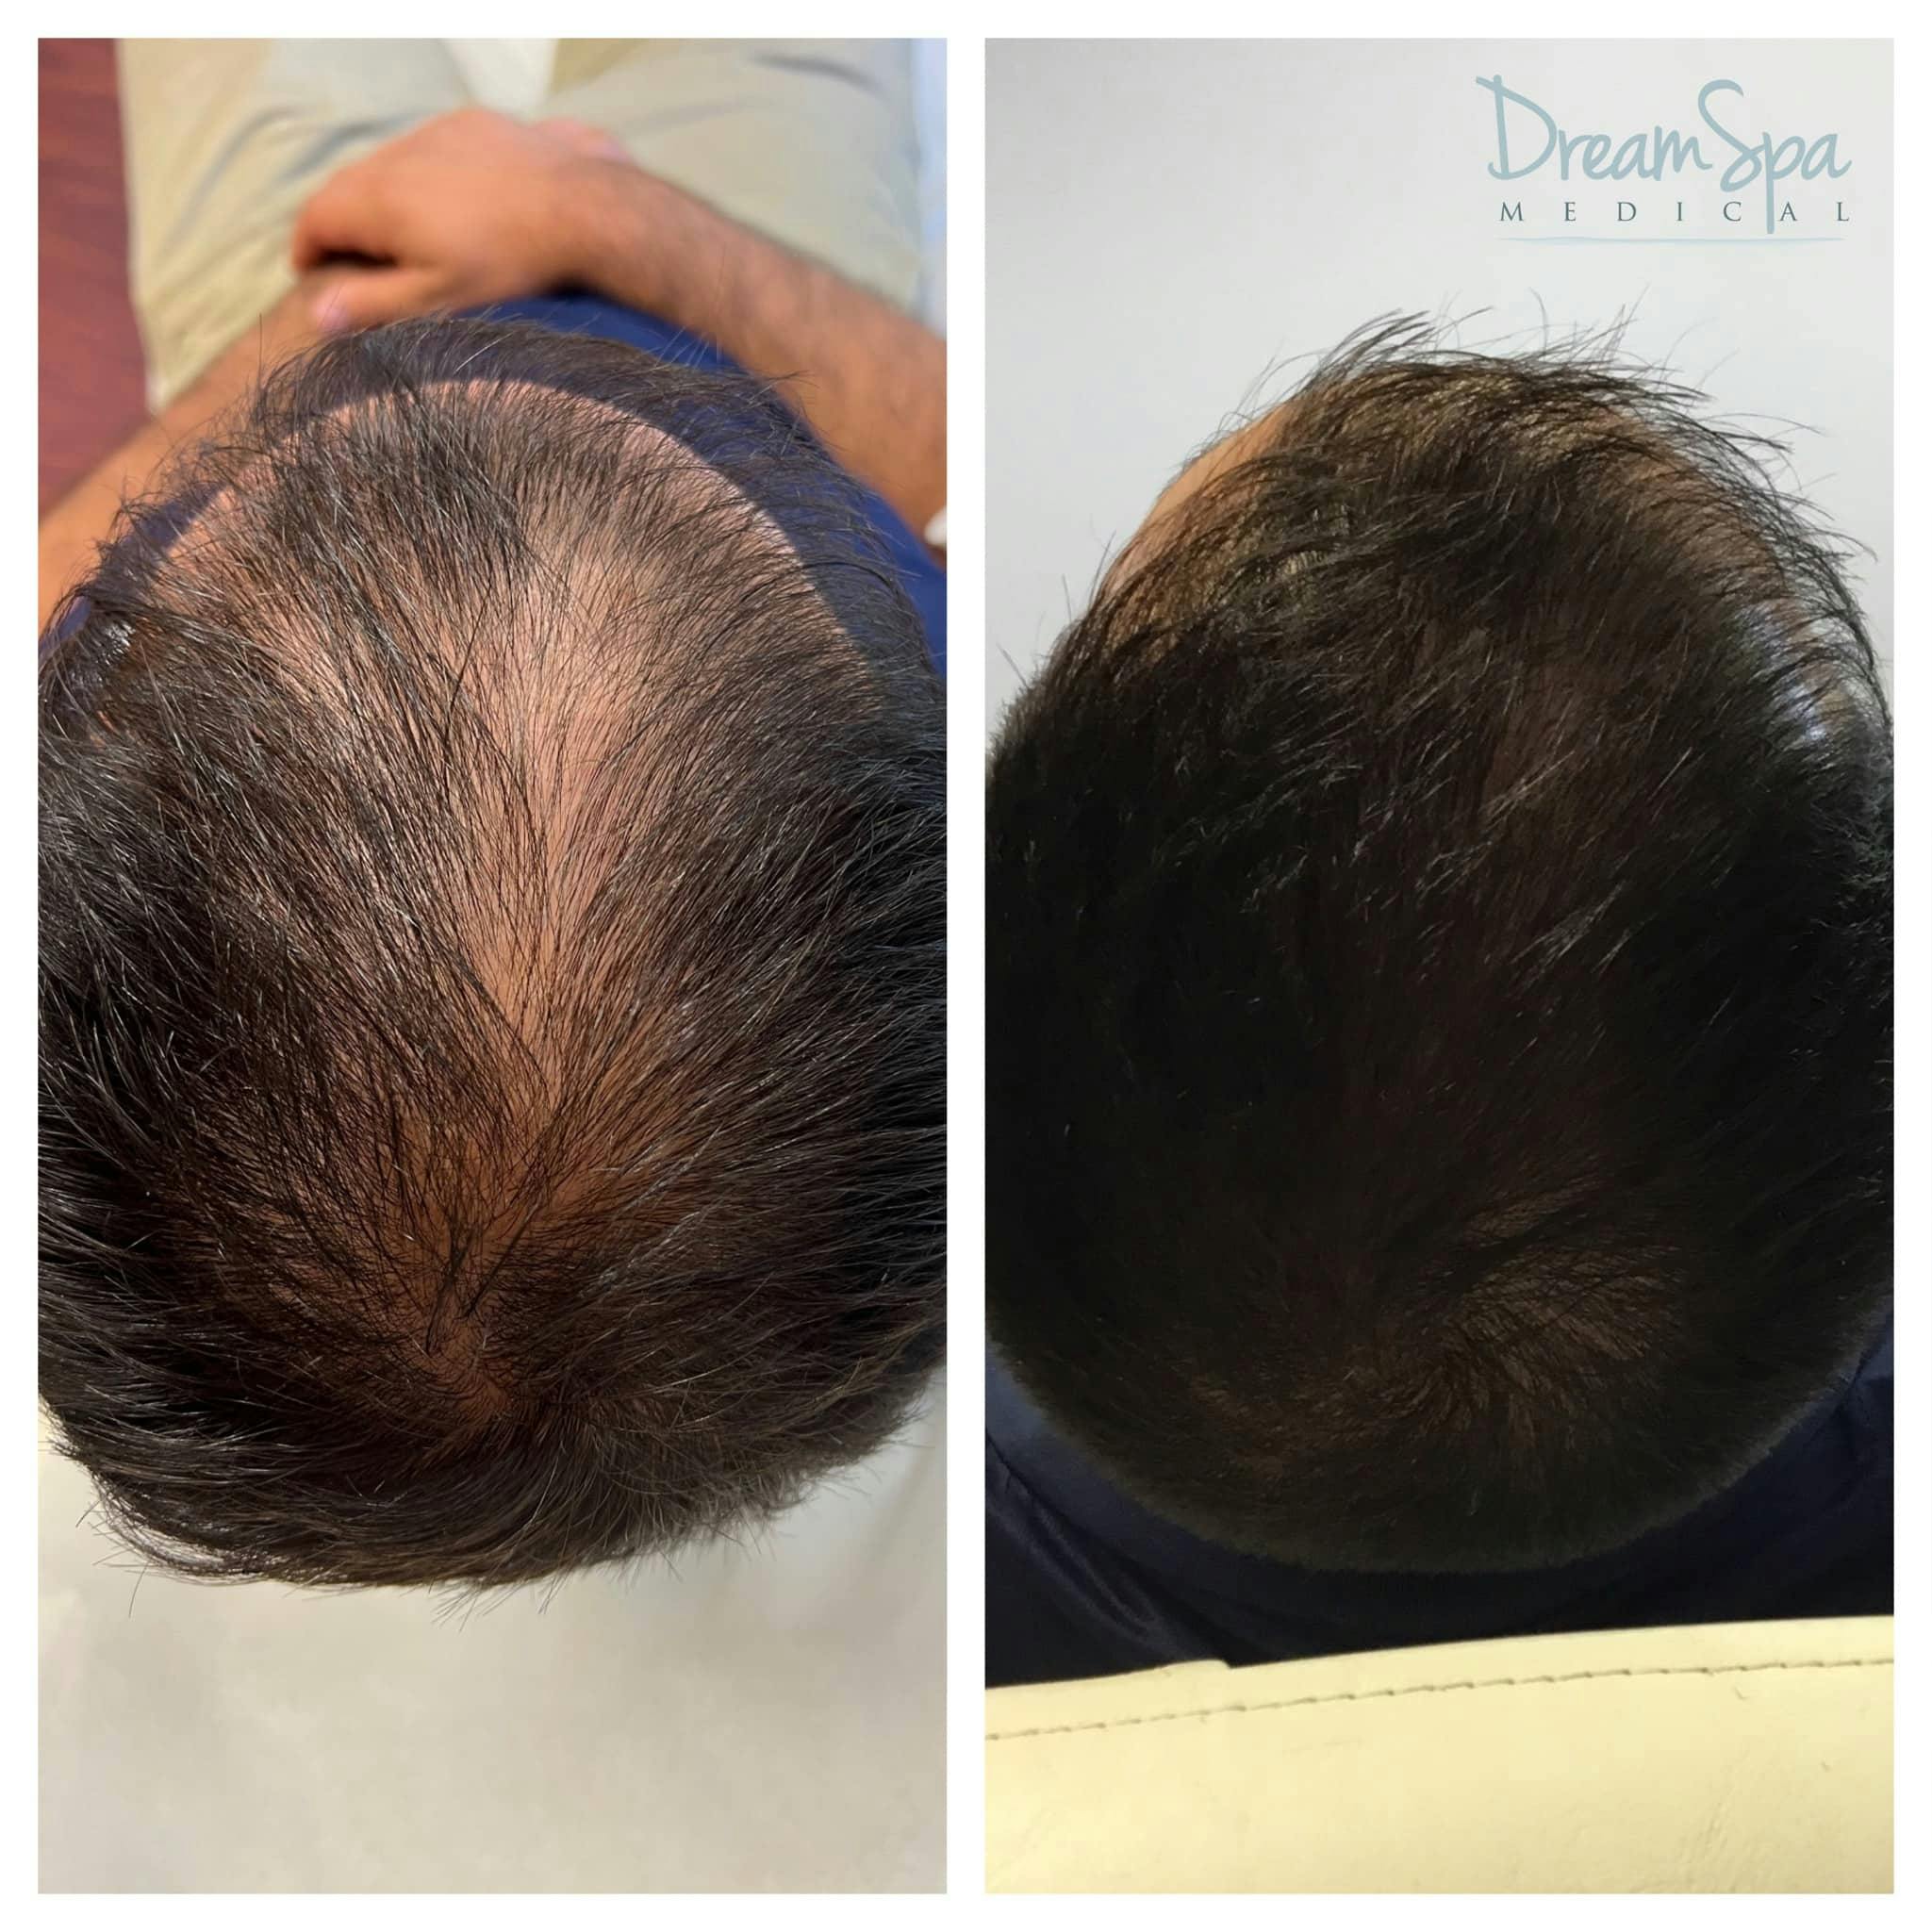 Hair Restoration Before & After